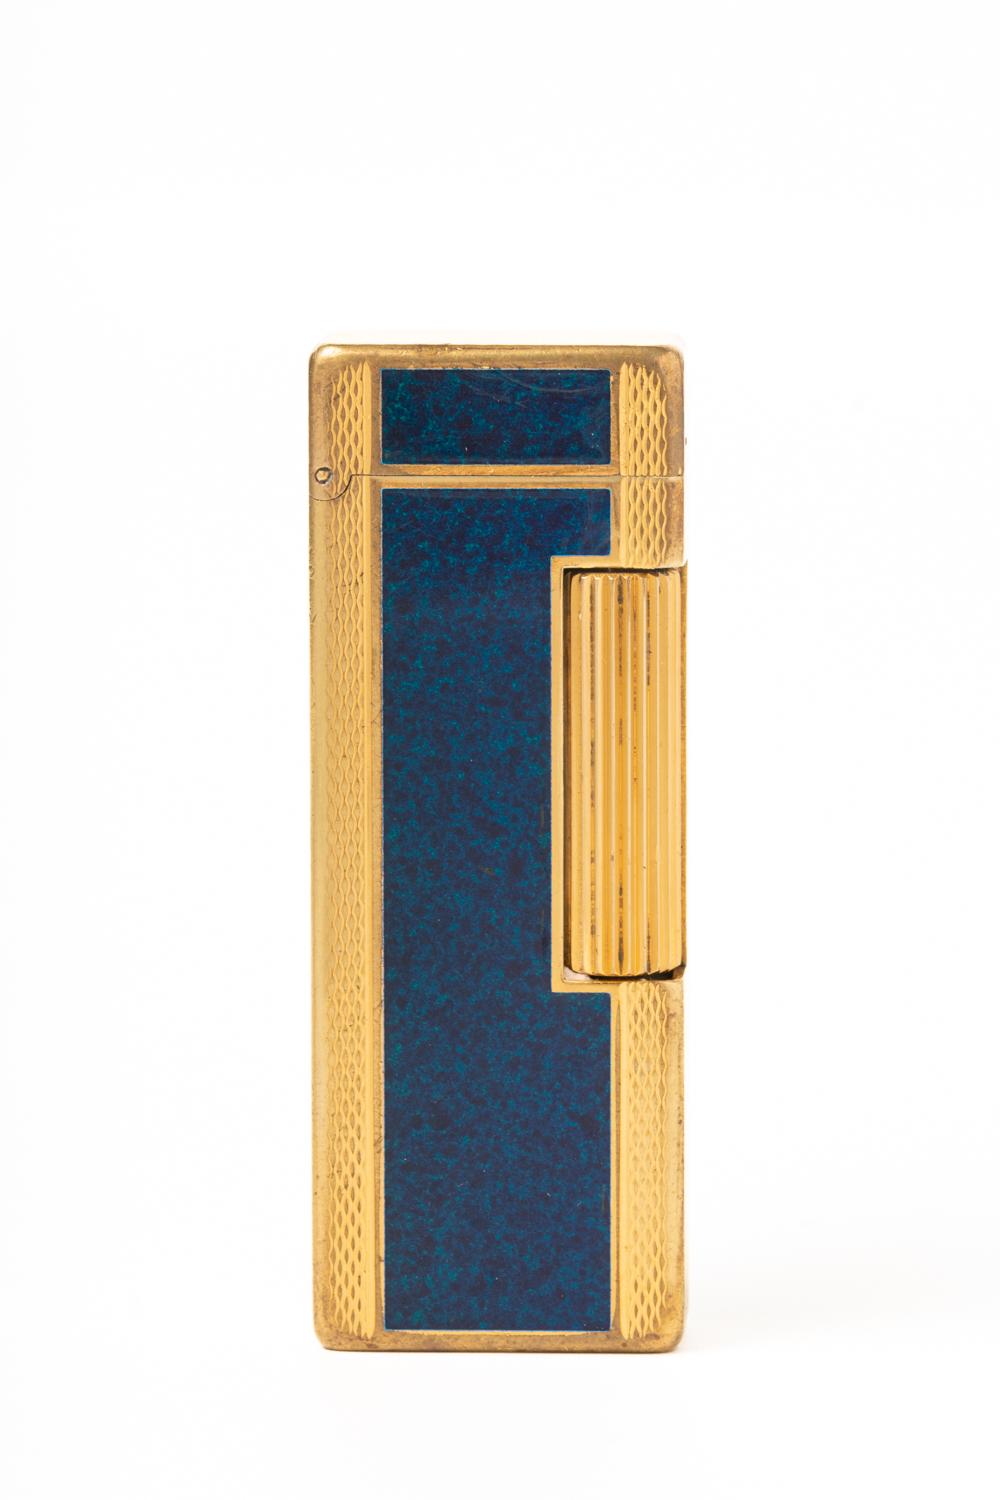 Iconic and timeless gold-plated Dunhill lighter with very elegant and luxurious Chinese blue lacquer. The lighter is in good vintage and in full working condition; The lighter is stamped on the base: 'Dunhill', 'SWISS MADE', serial number '24163'.